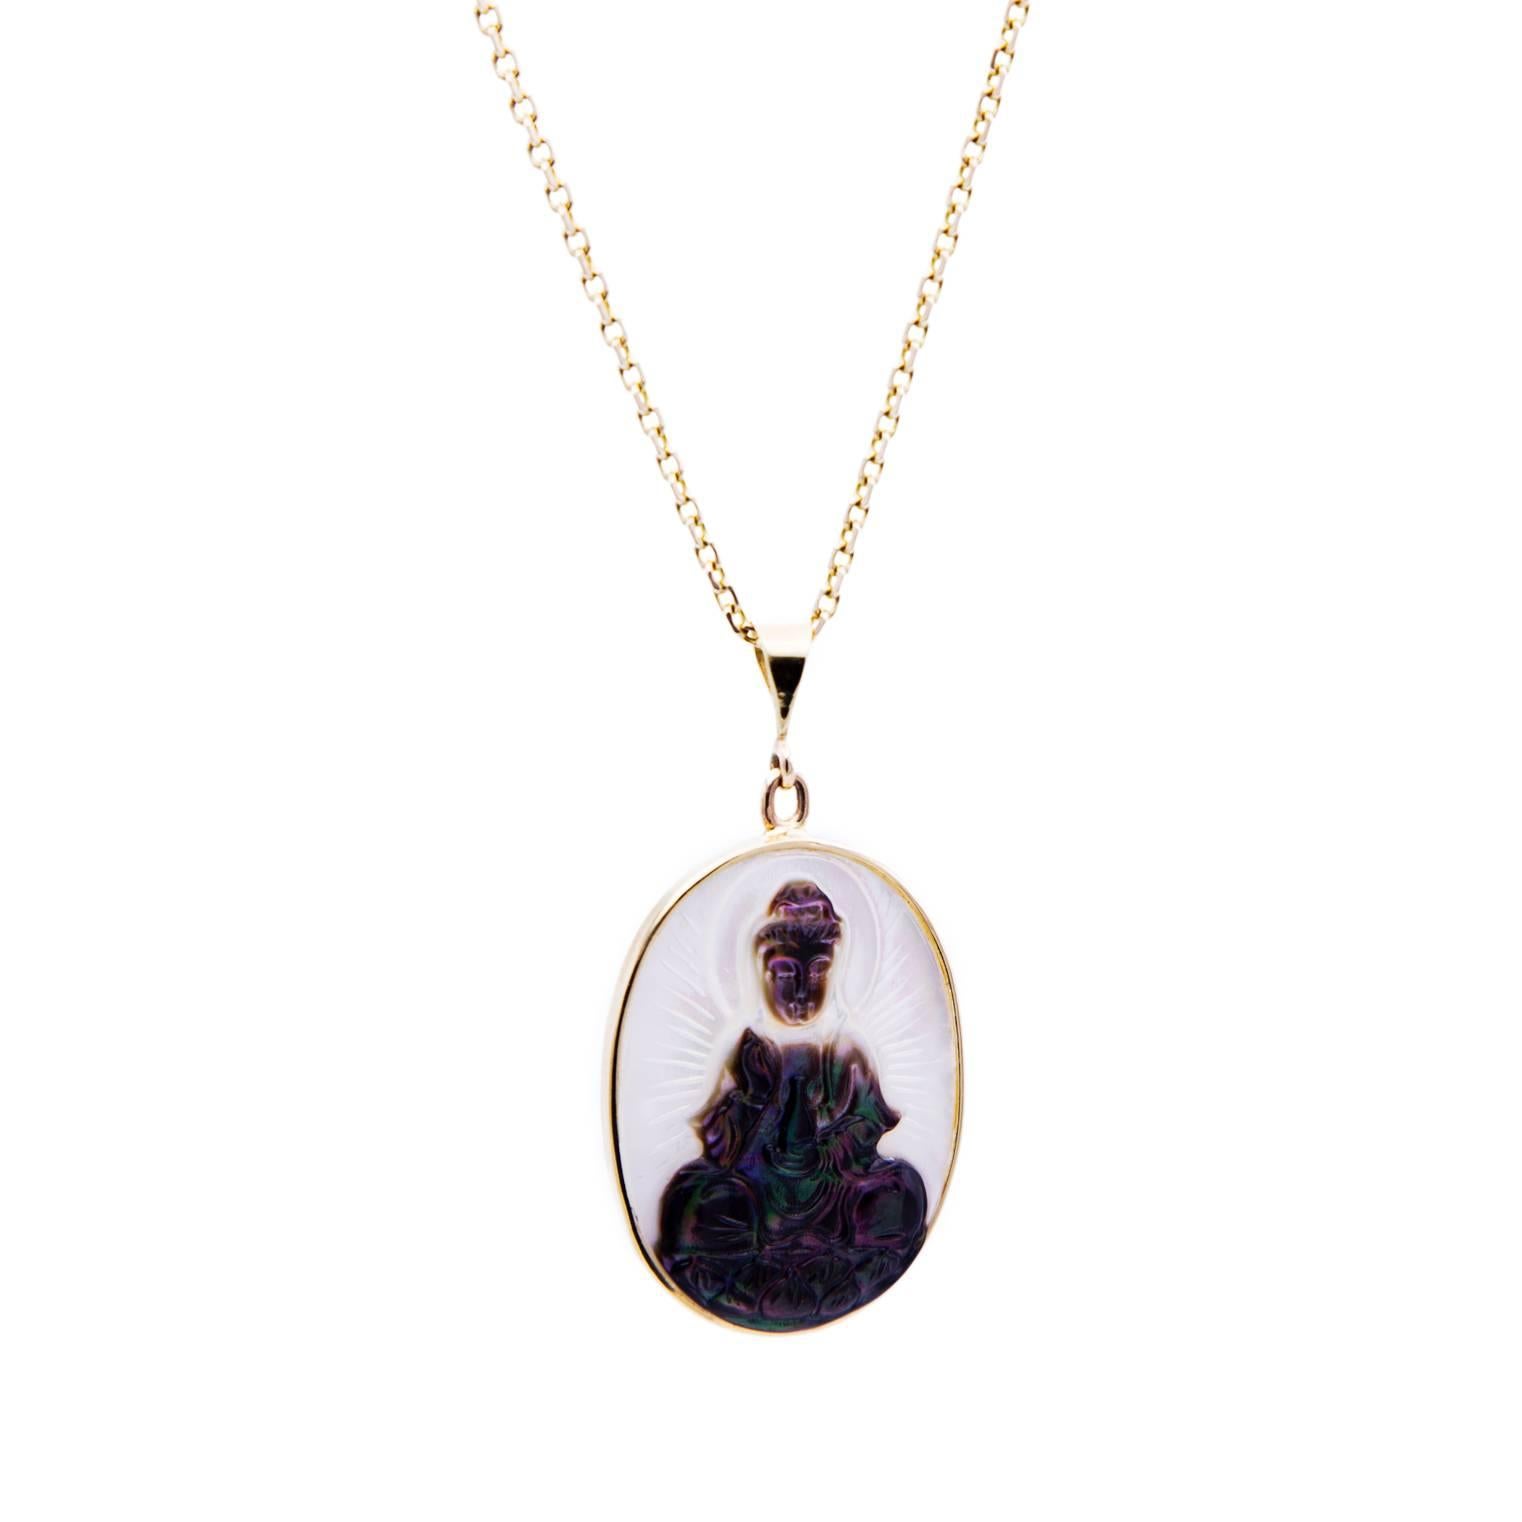 A beautiful hand carved mother of pearl pendant from a black lipped oyster in the Cook Islands-this pendant glows! Quan Yin, the female manifestation of the Buddha is exuberantly carved in fine detail. A wonderful halo around her crown and lines of